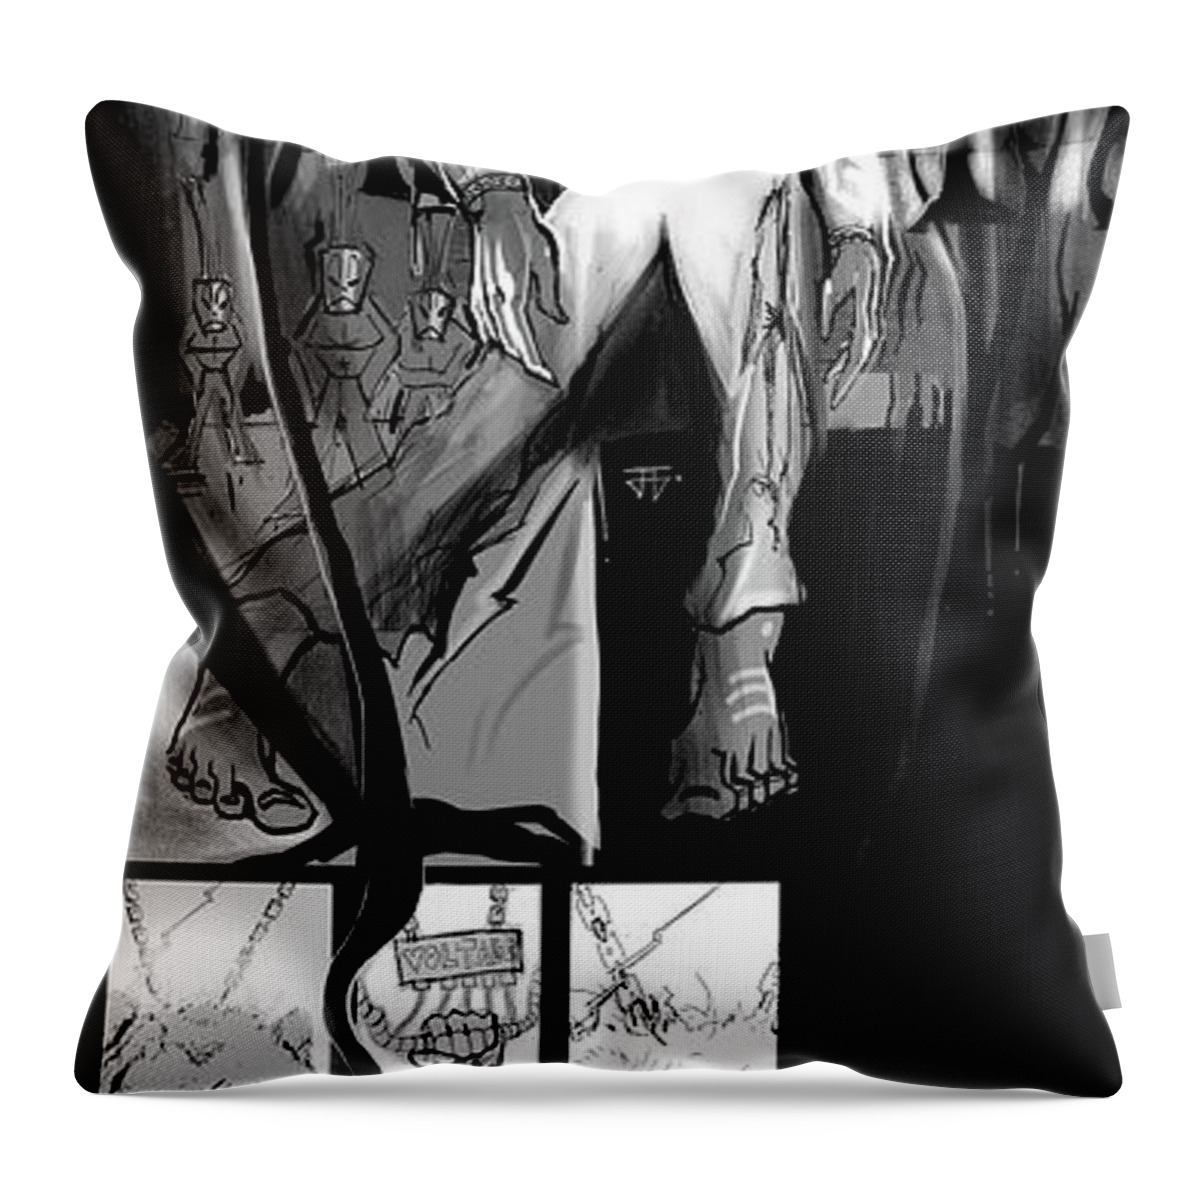  Throw Pillow featuring the painting 45 by John Gholson